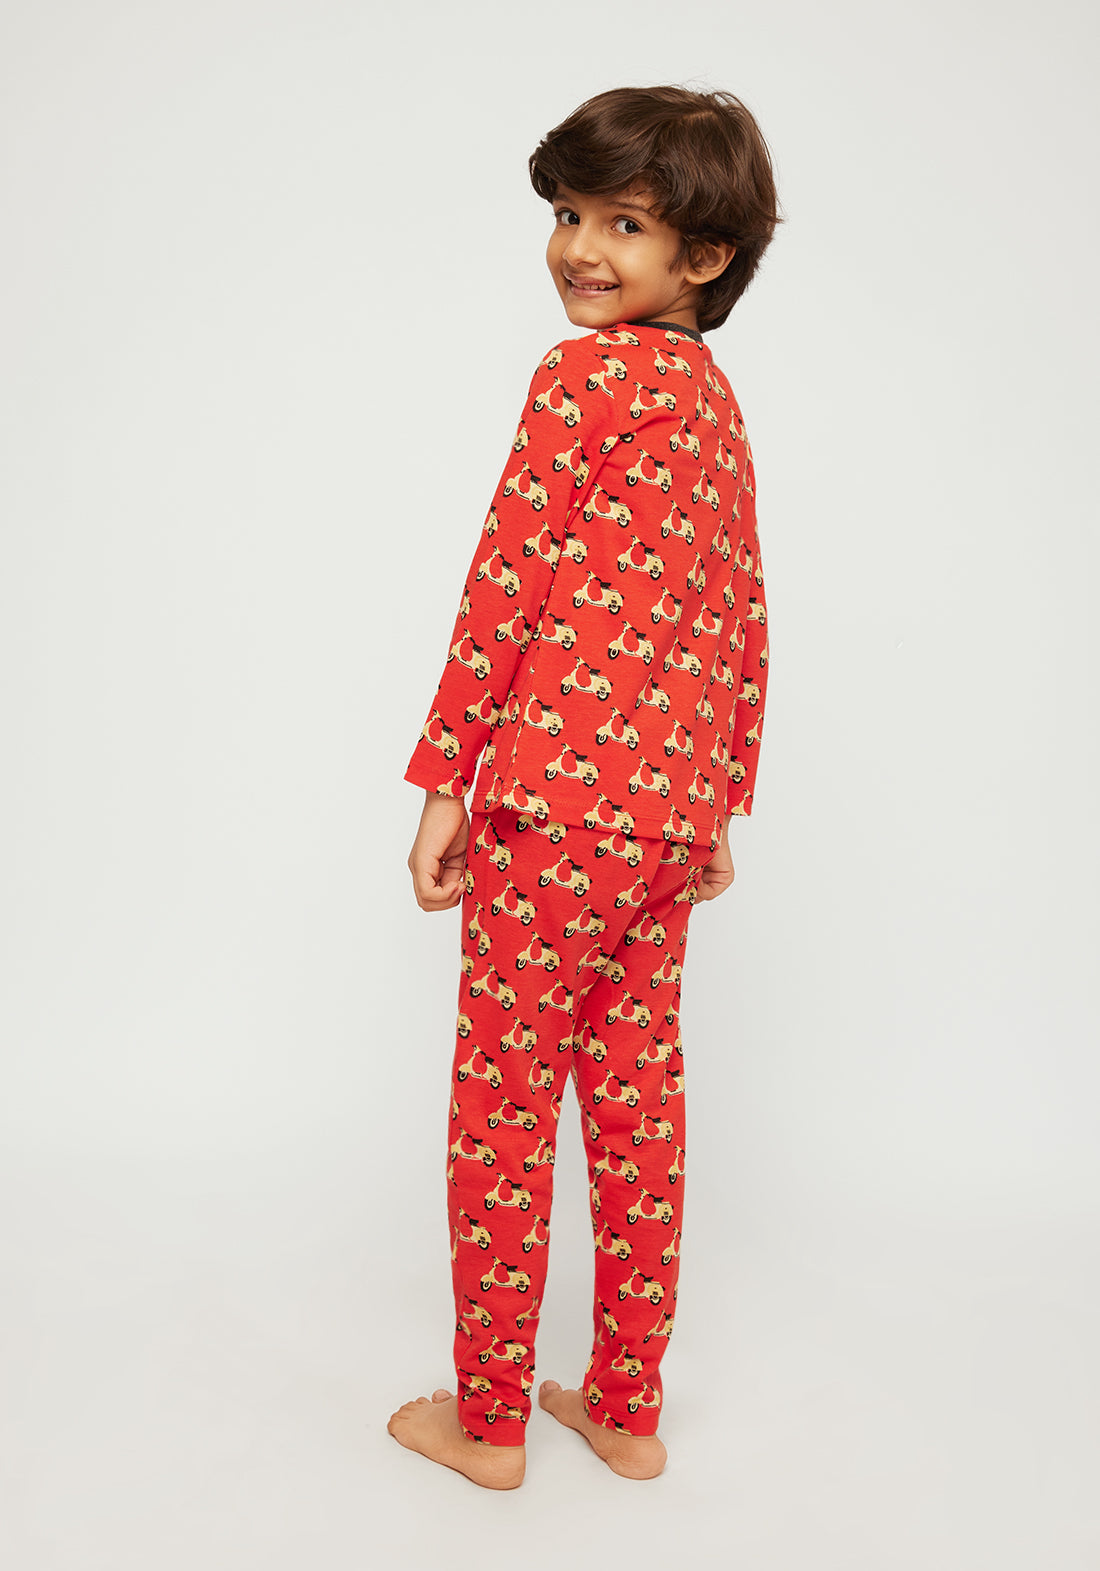 RED, YELLOW AND BLACK SCOOTER PRINT LONG SLEEVE PAJAMA SET